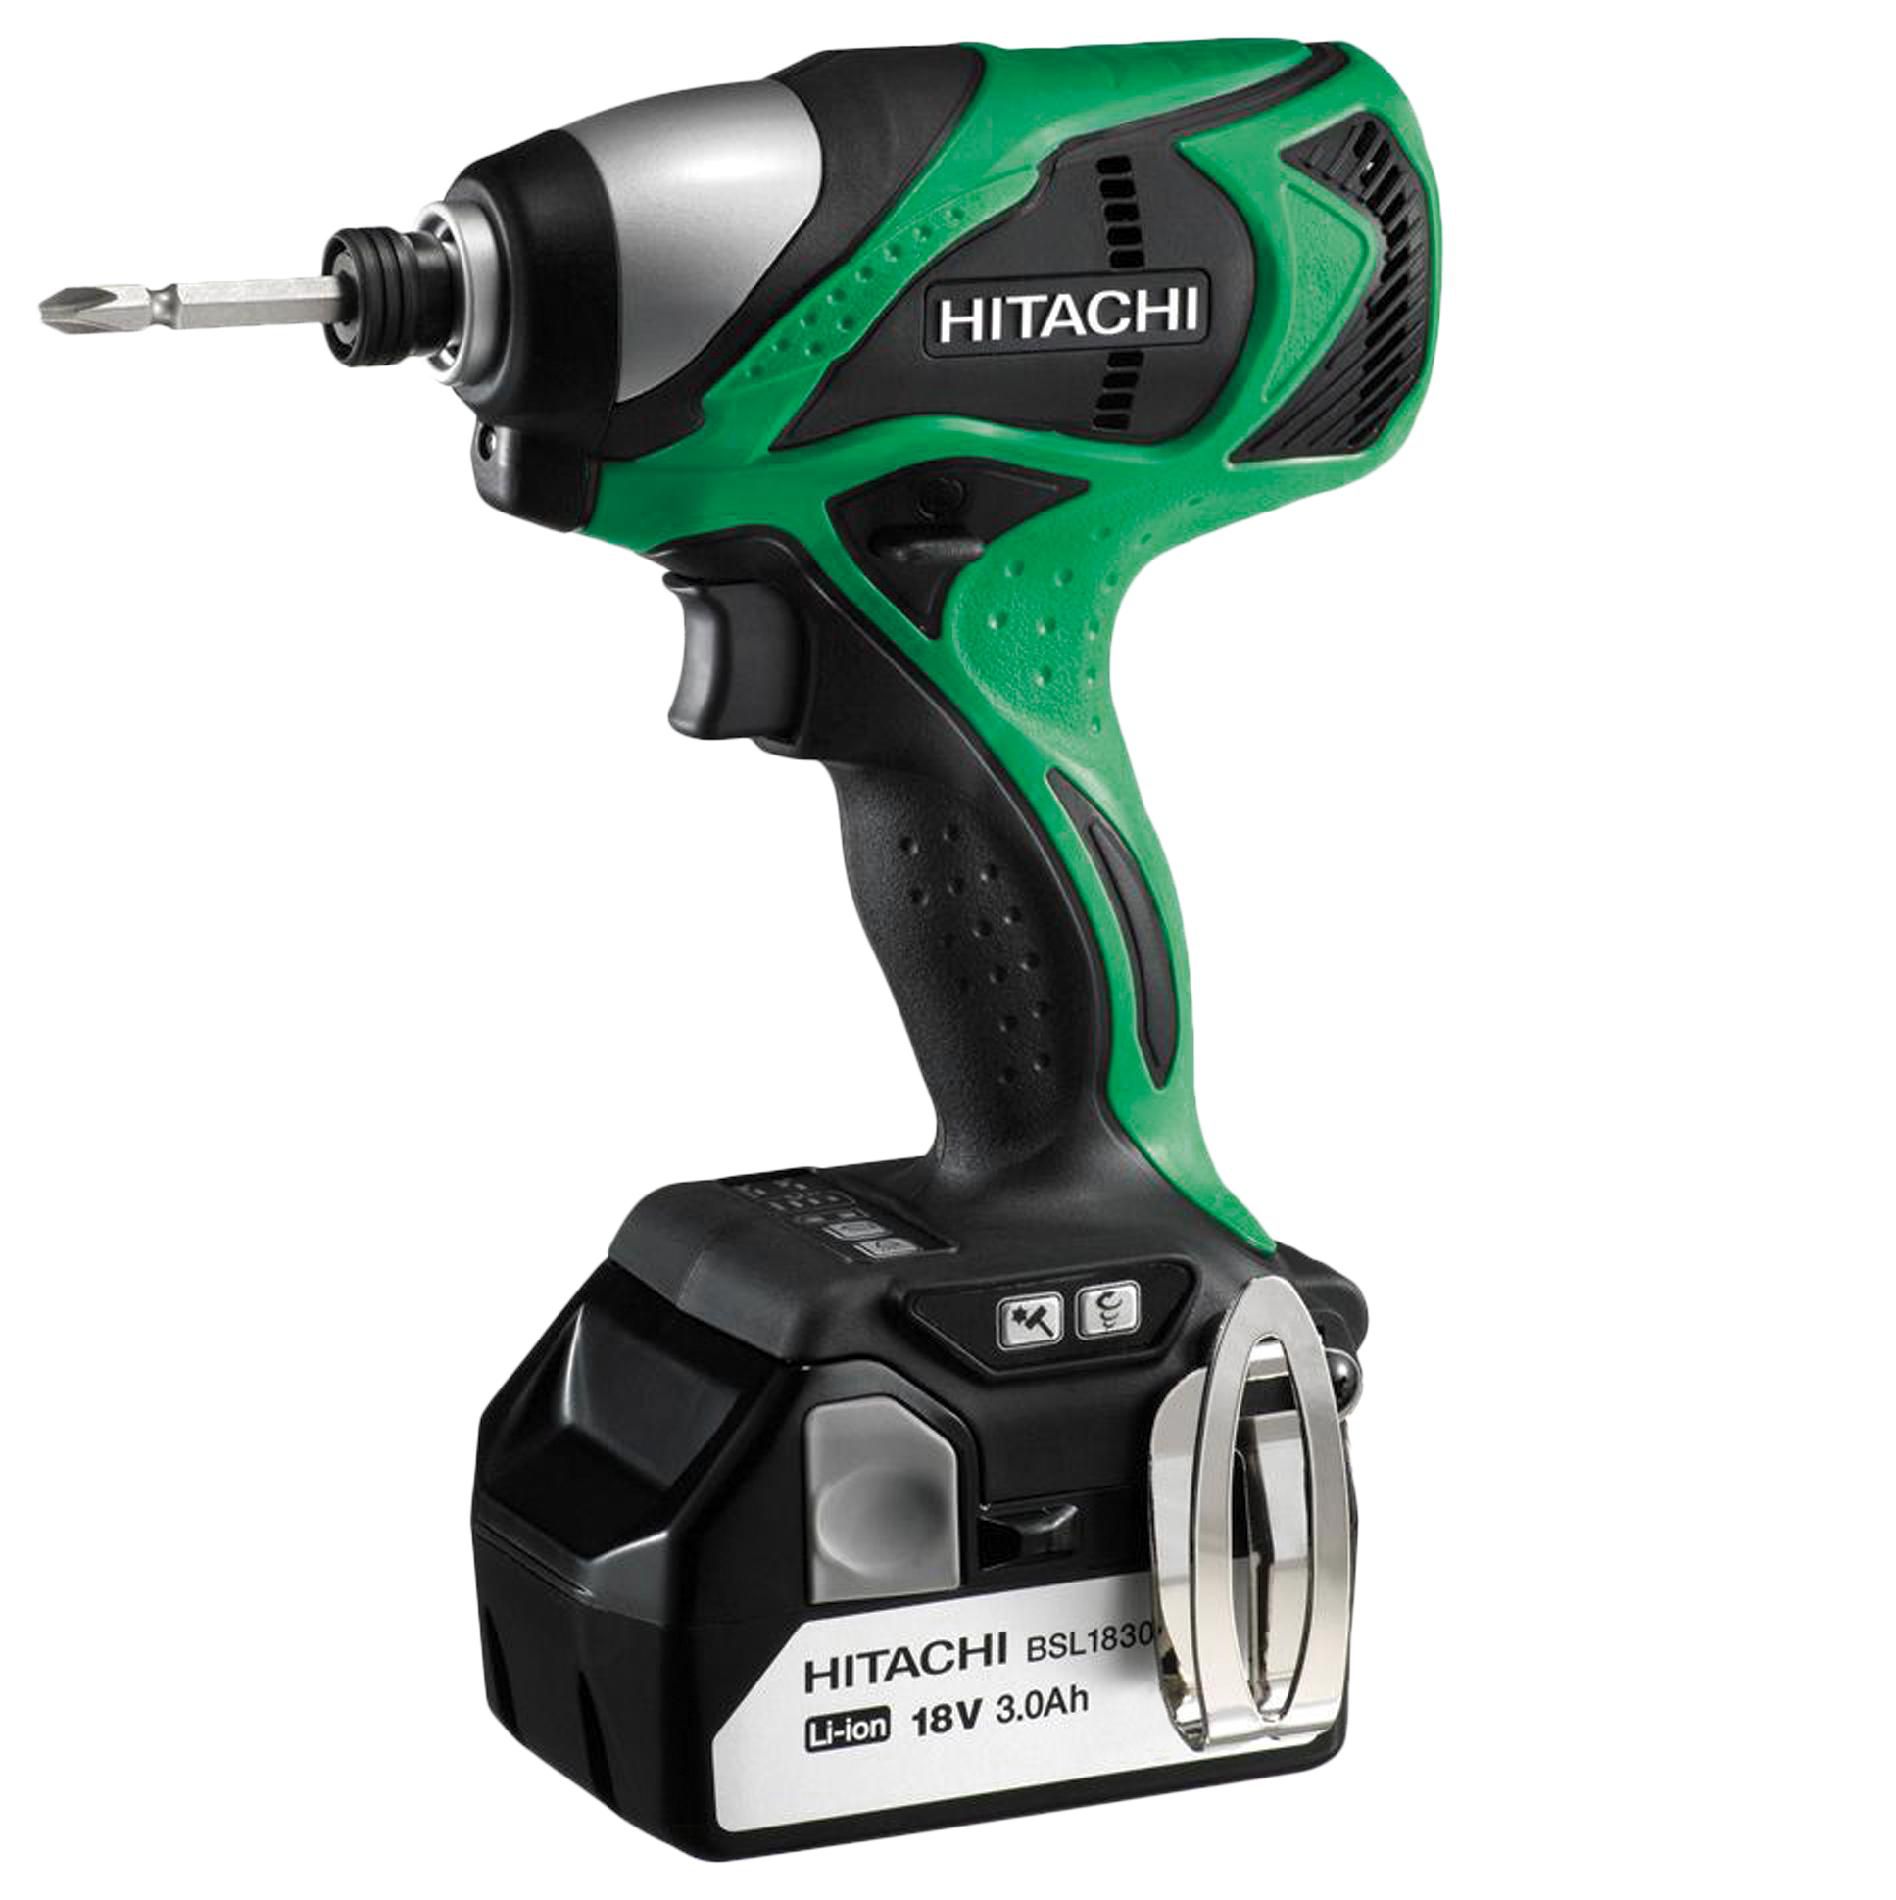 Hitachi WH18DBDL 18-Volt 3.0-Ah Cordless Brushless Lithium-Ion Impact Driver, (2) Batteries and Charger Included